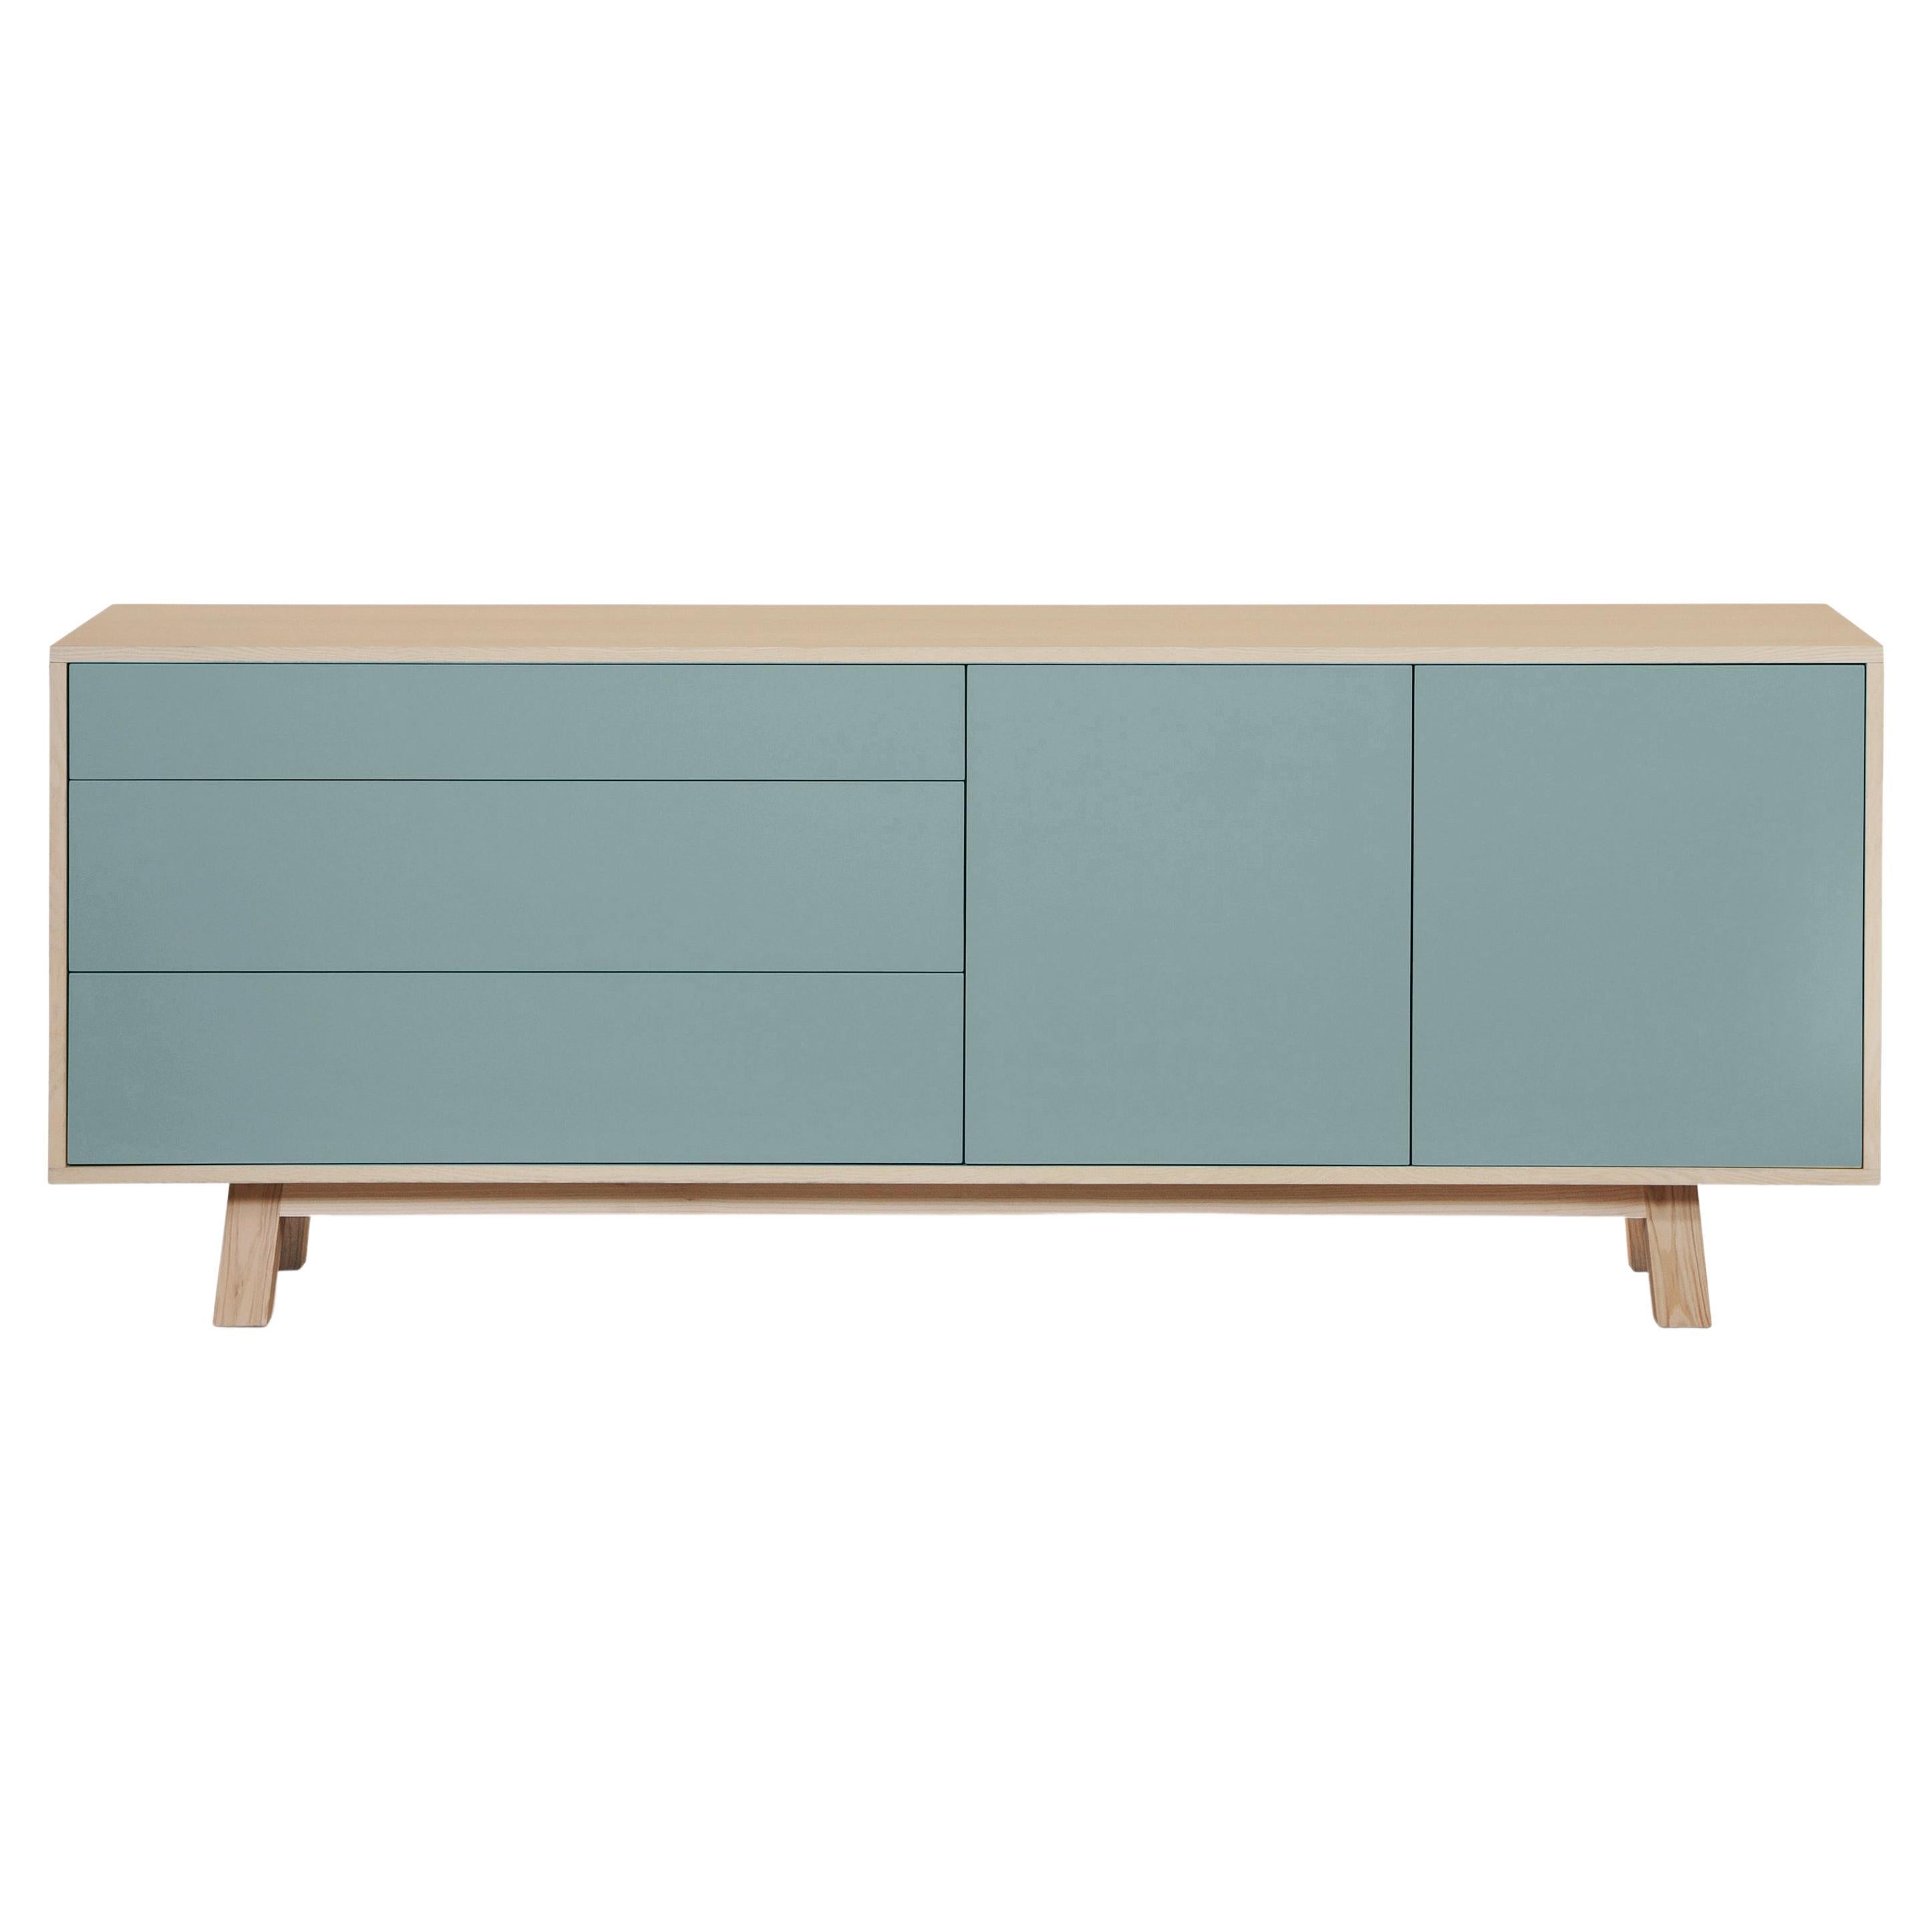 This 2 doors and 3 drawers sideboard is designed by Eric Gizard - Paris.

It is 100% made in France with solid ash wood, veneer and lacquered doors in MDF panels. 

The 2 doors open with a 